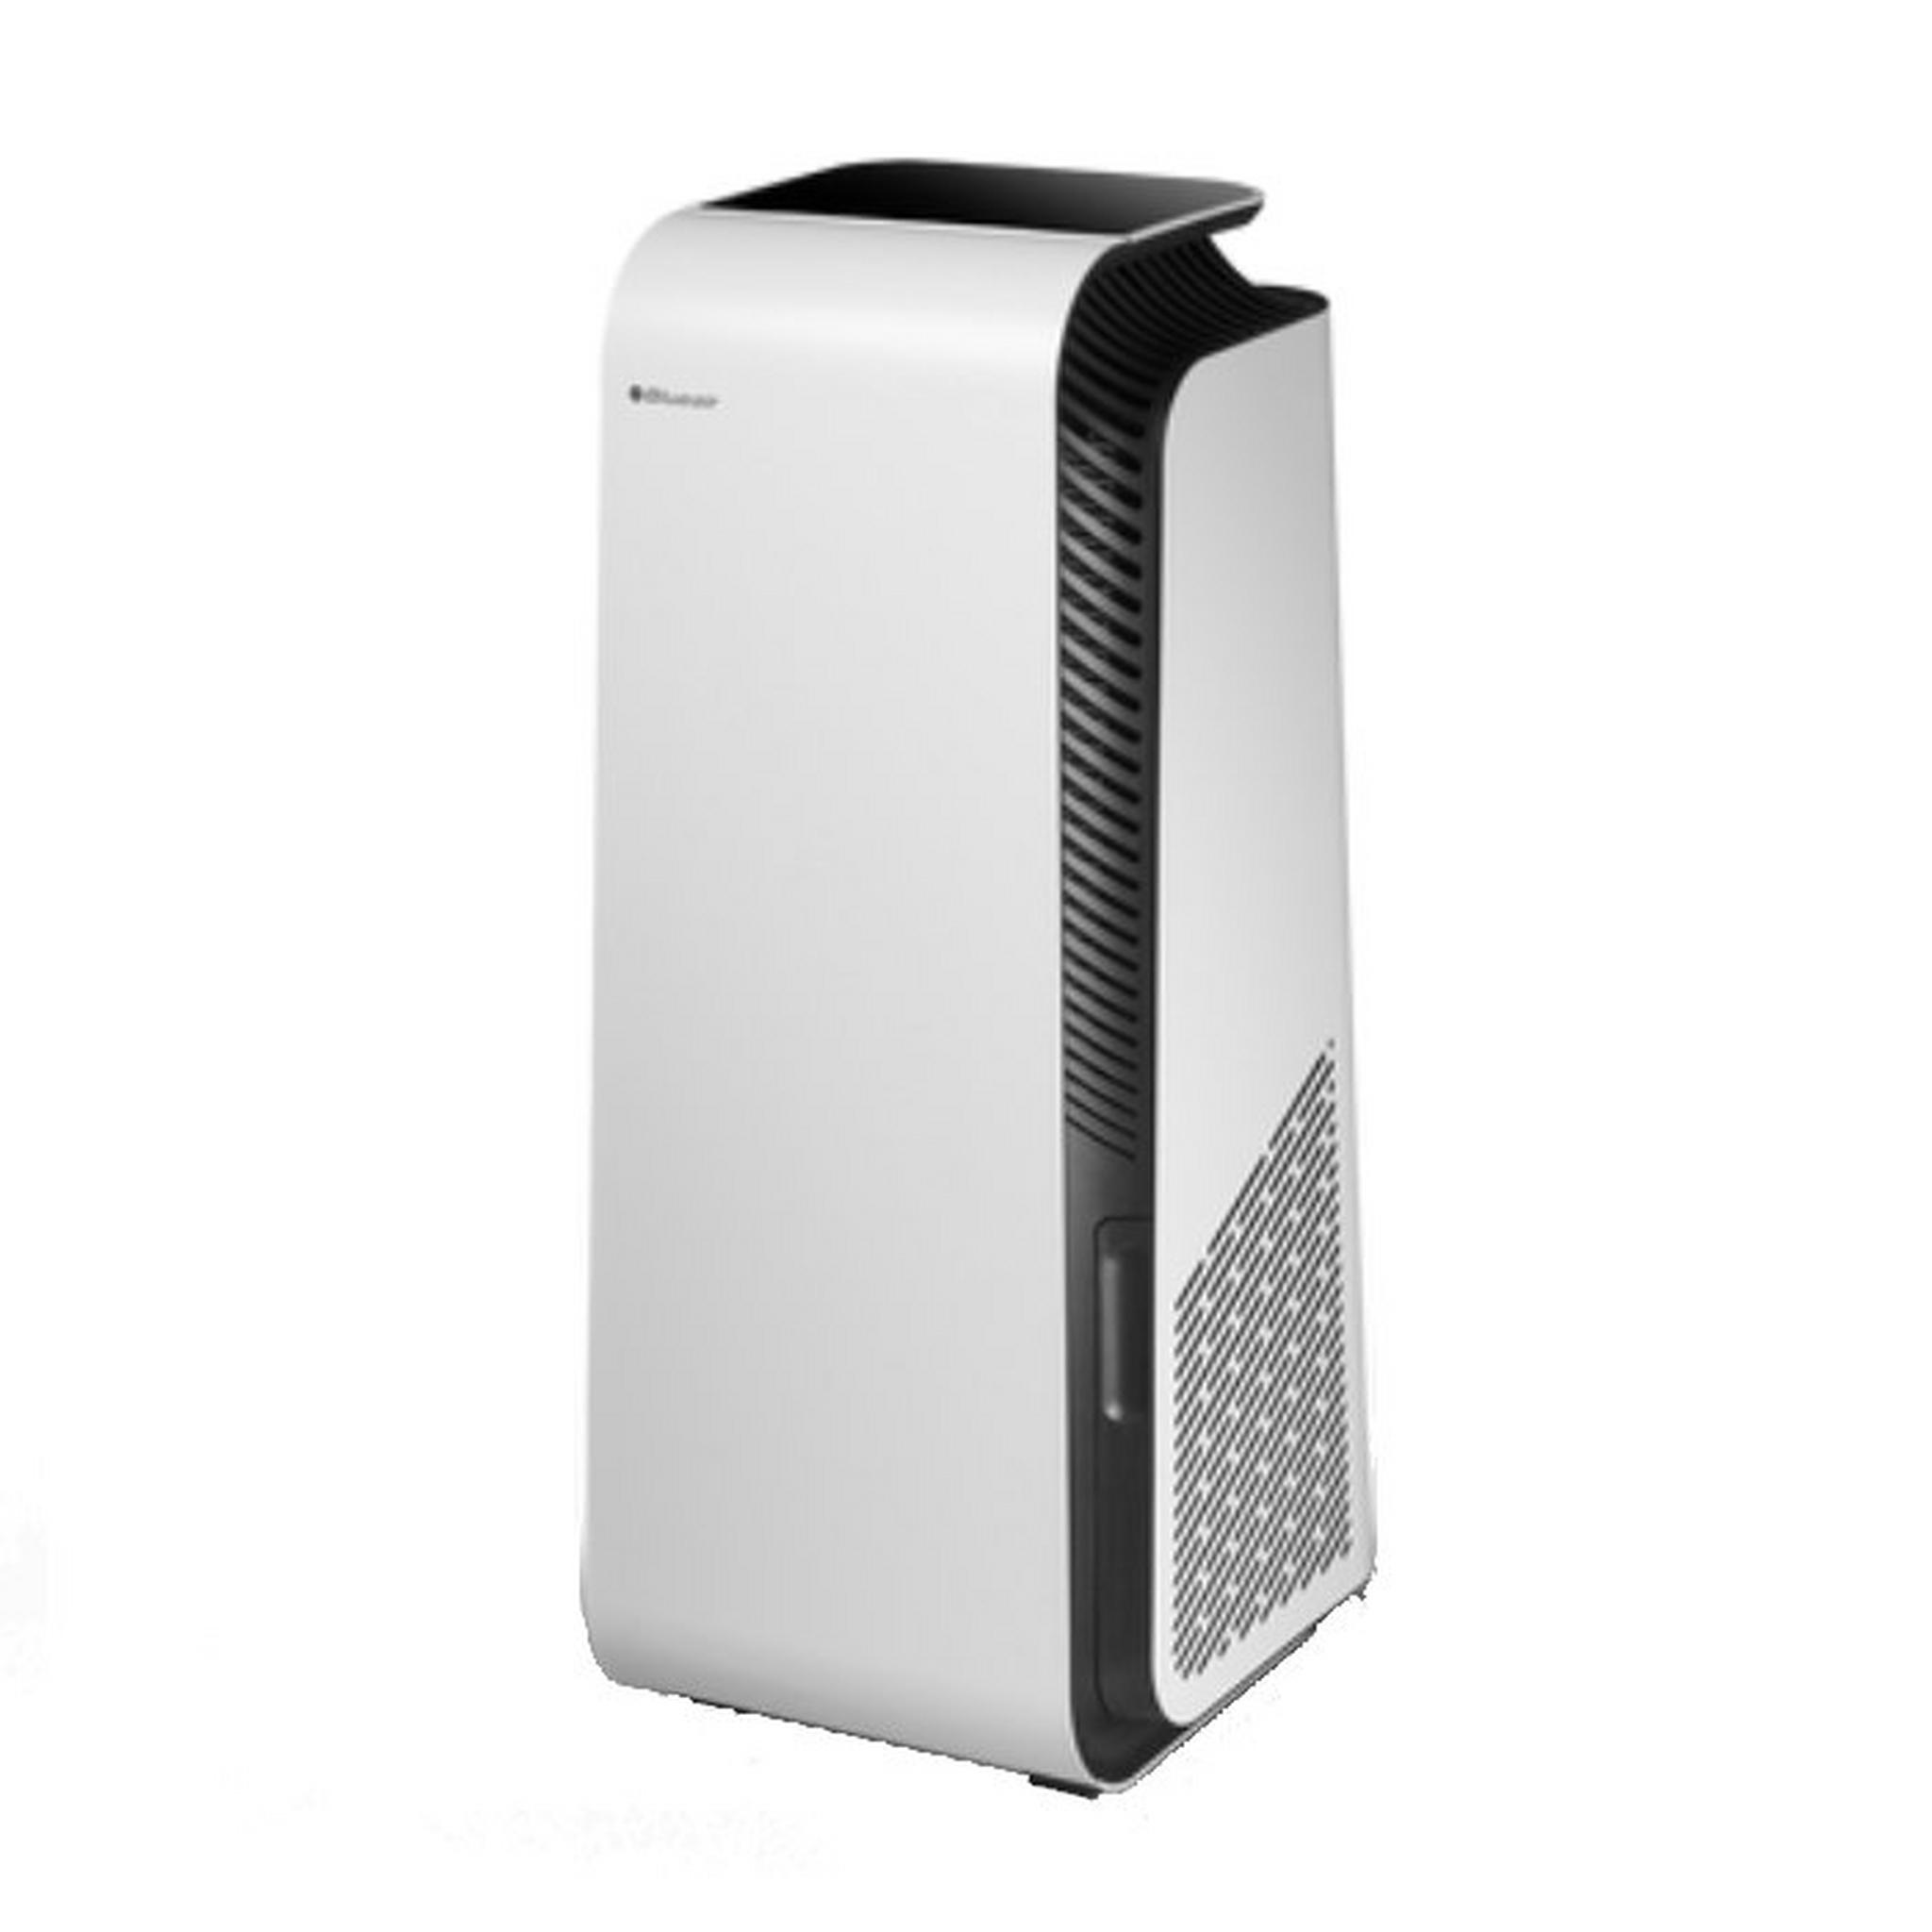 Blueair HealthProtect 7470i Air Purifier with SmartFilter